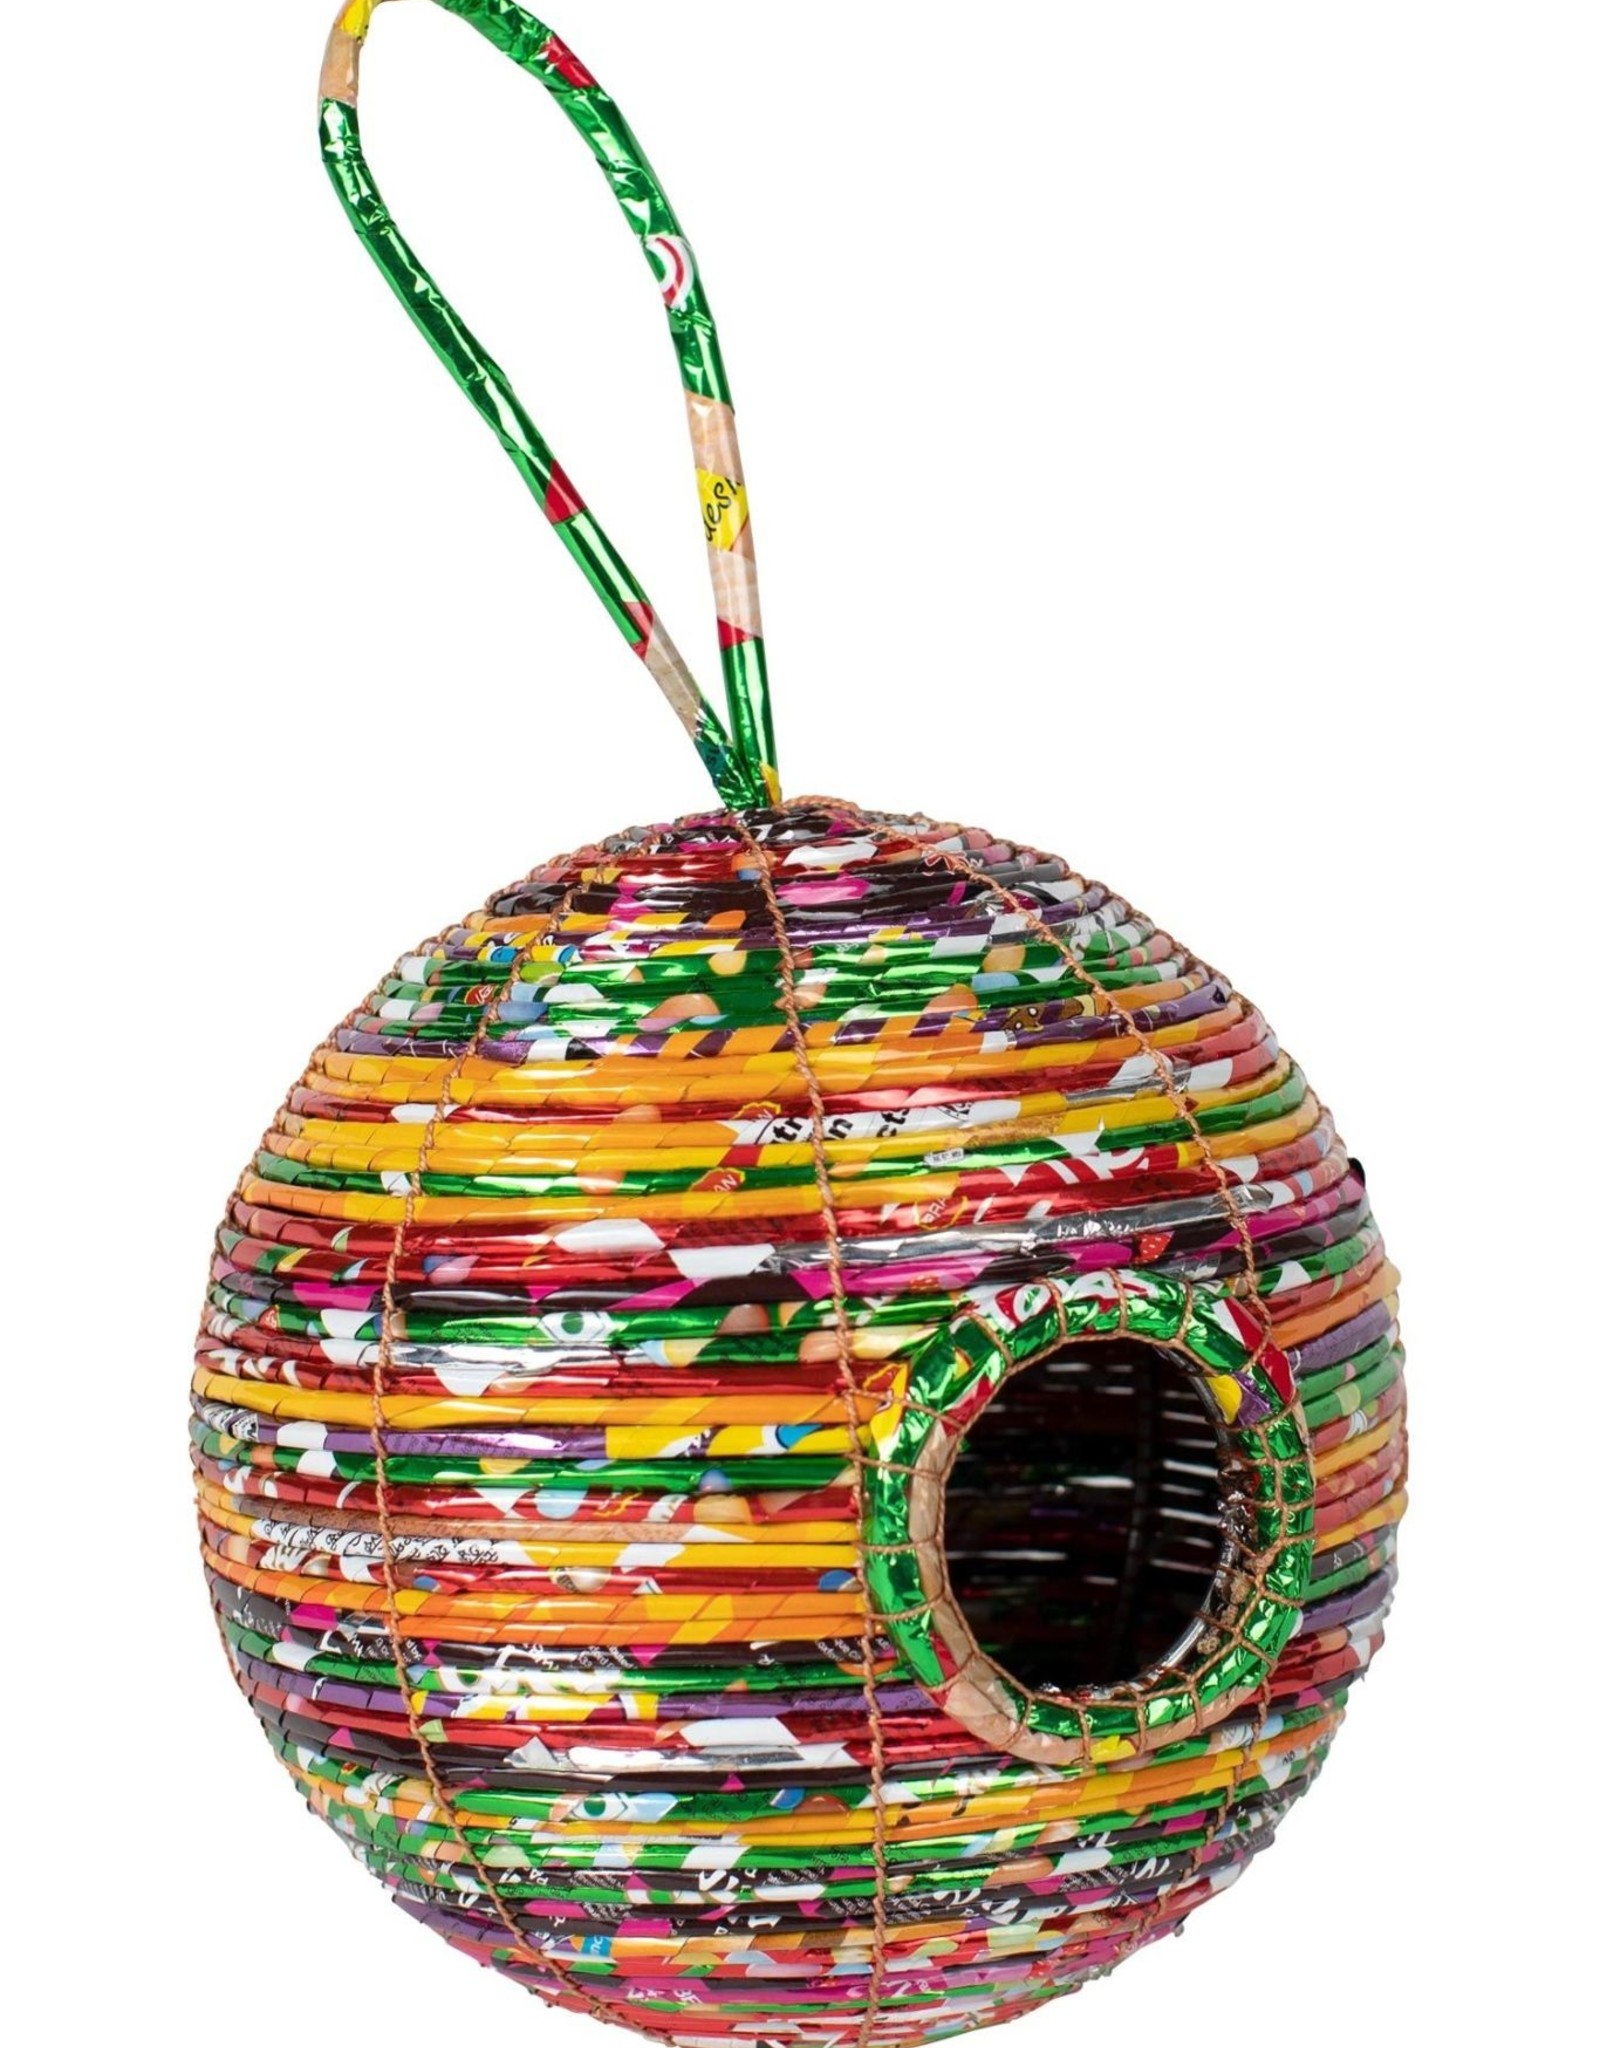 Ten Thousand Villages Round Recycled Birdhouse